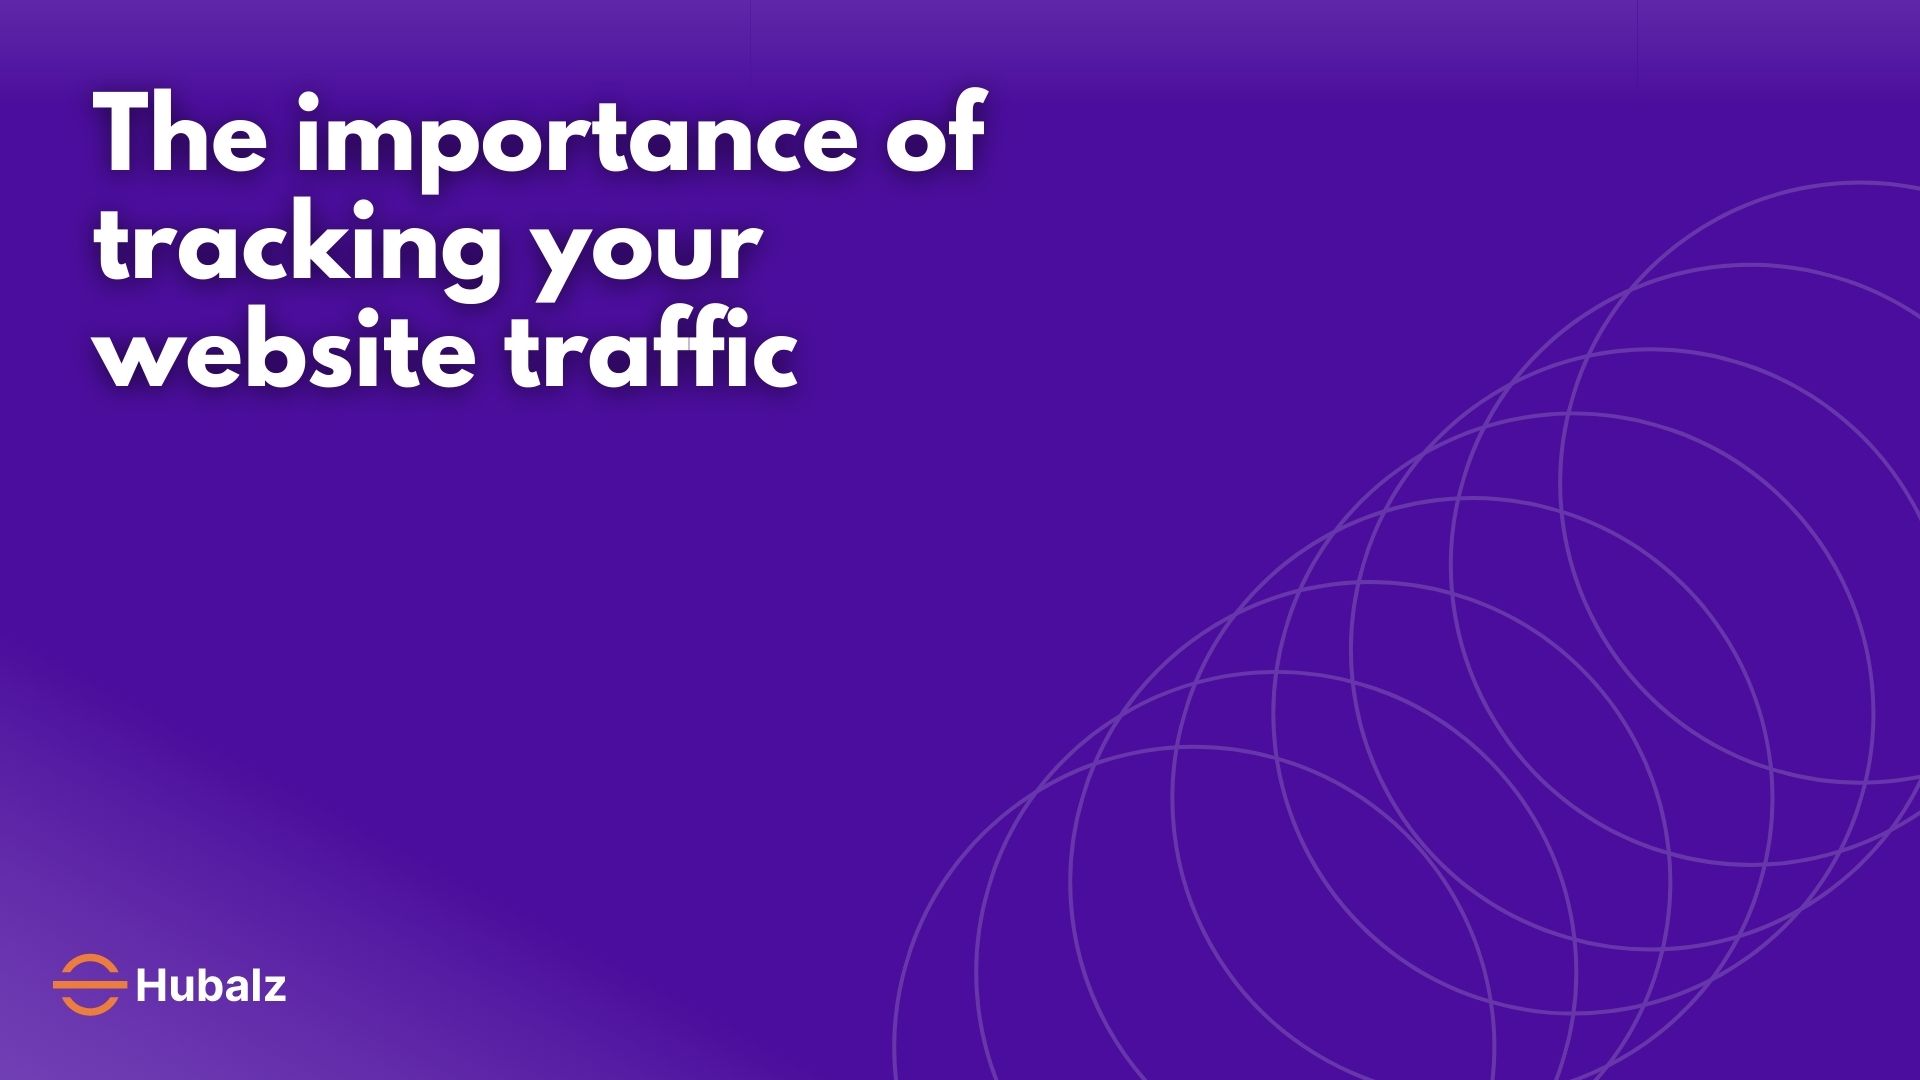 The importance of tracking your website traffic